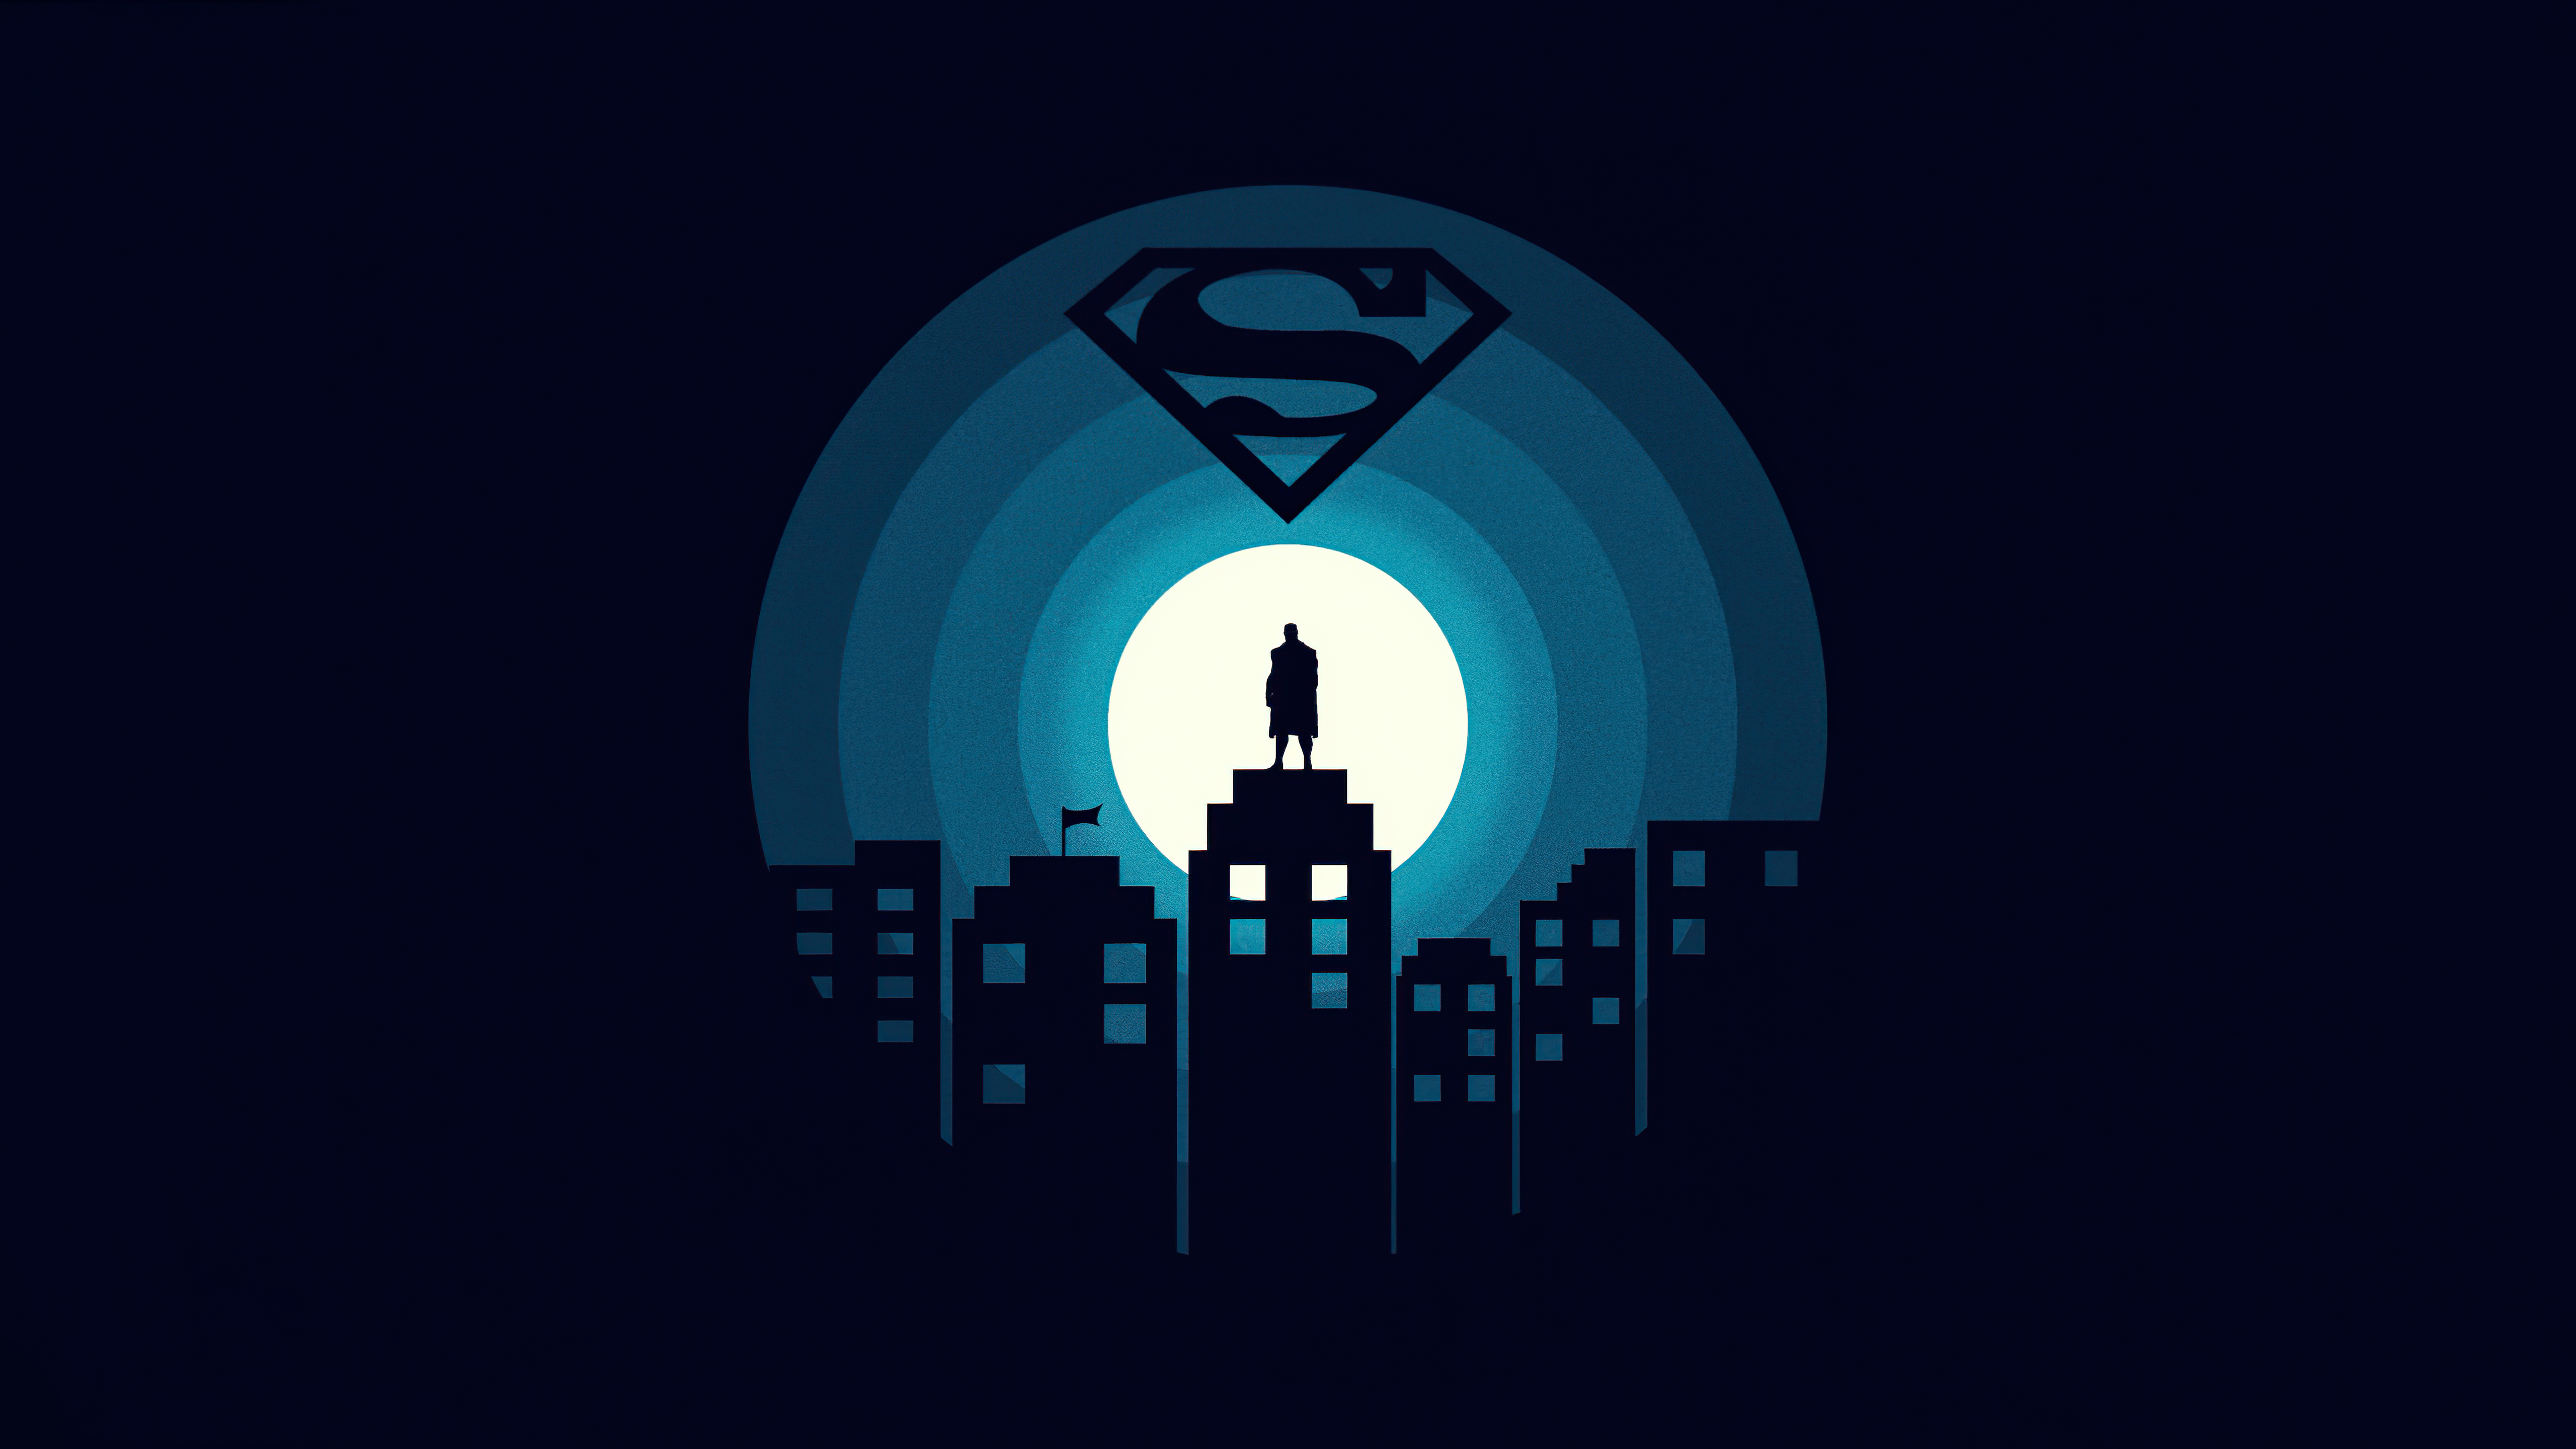 800x1280 Superman Minimal Illustration 5k Nexus 7,Samsung Galaxy Tab  10,Note Android Tablets HD 4k Wallpapers, Images, Backgrounds, Photos and  Pictures